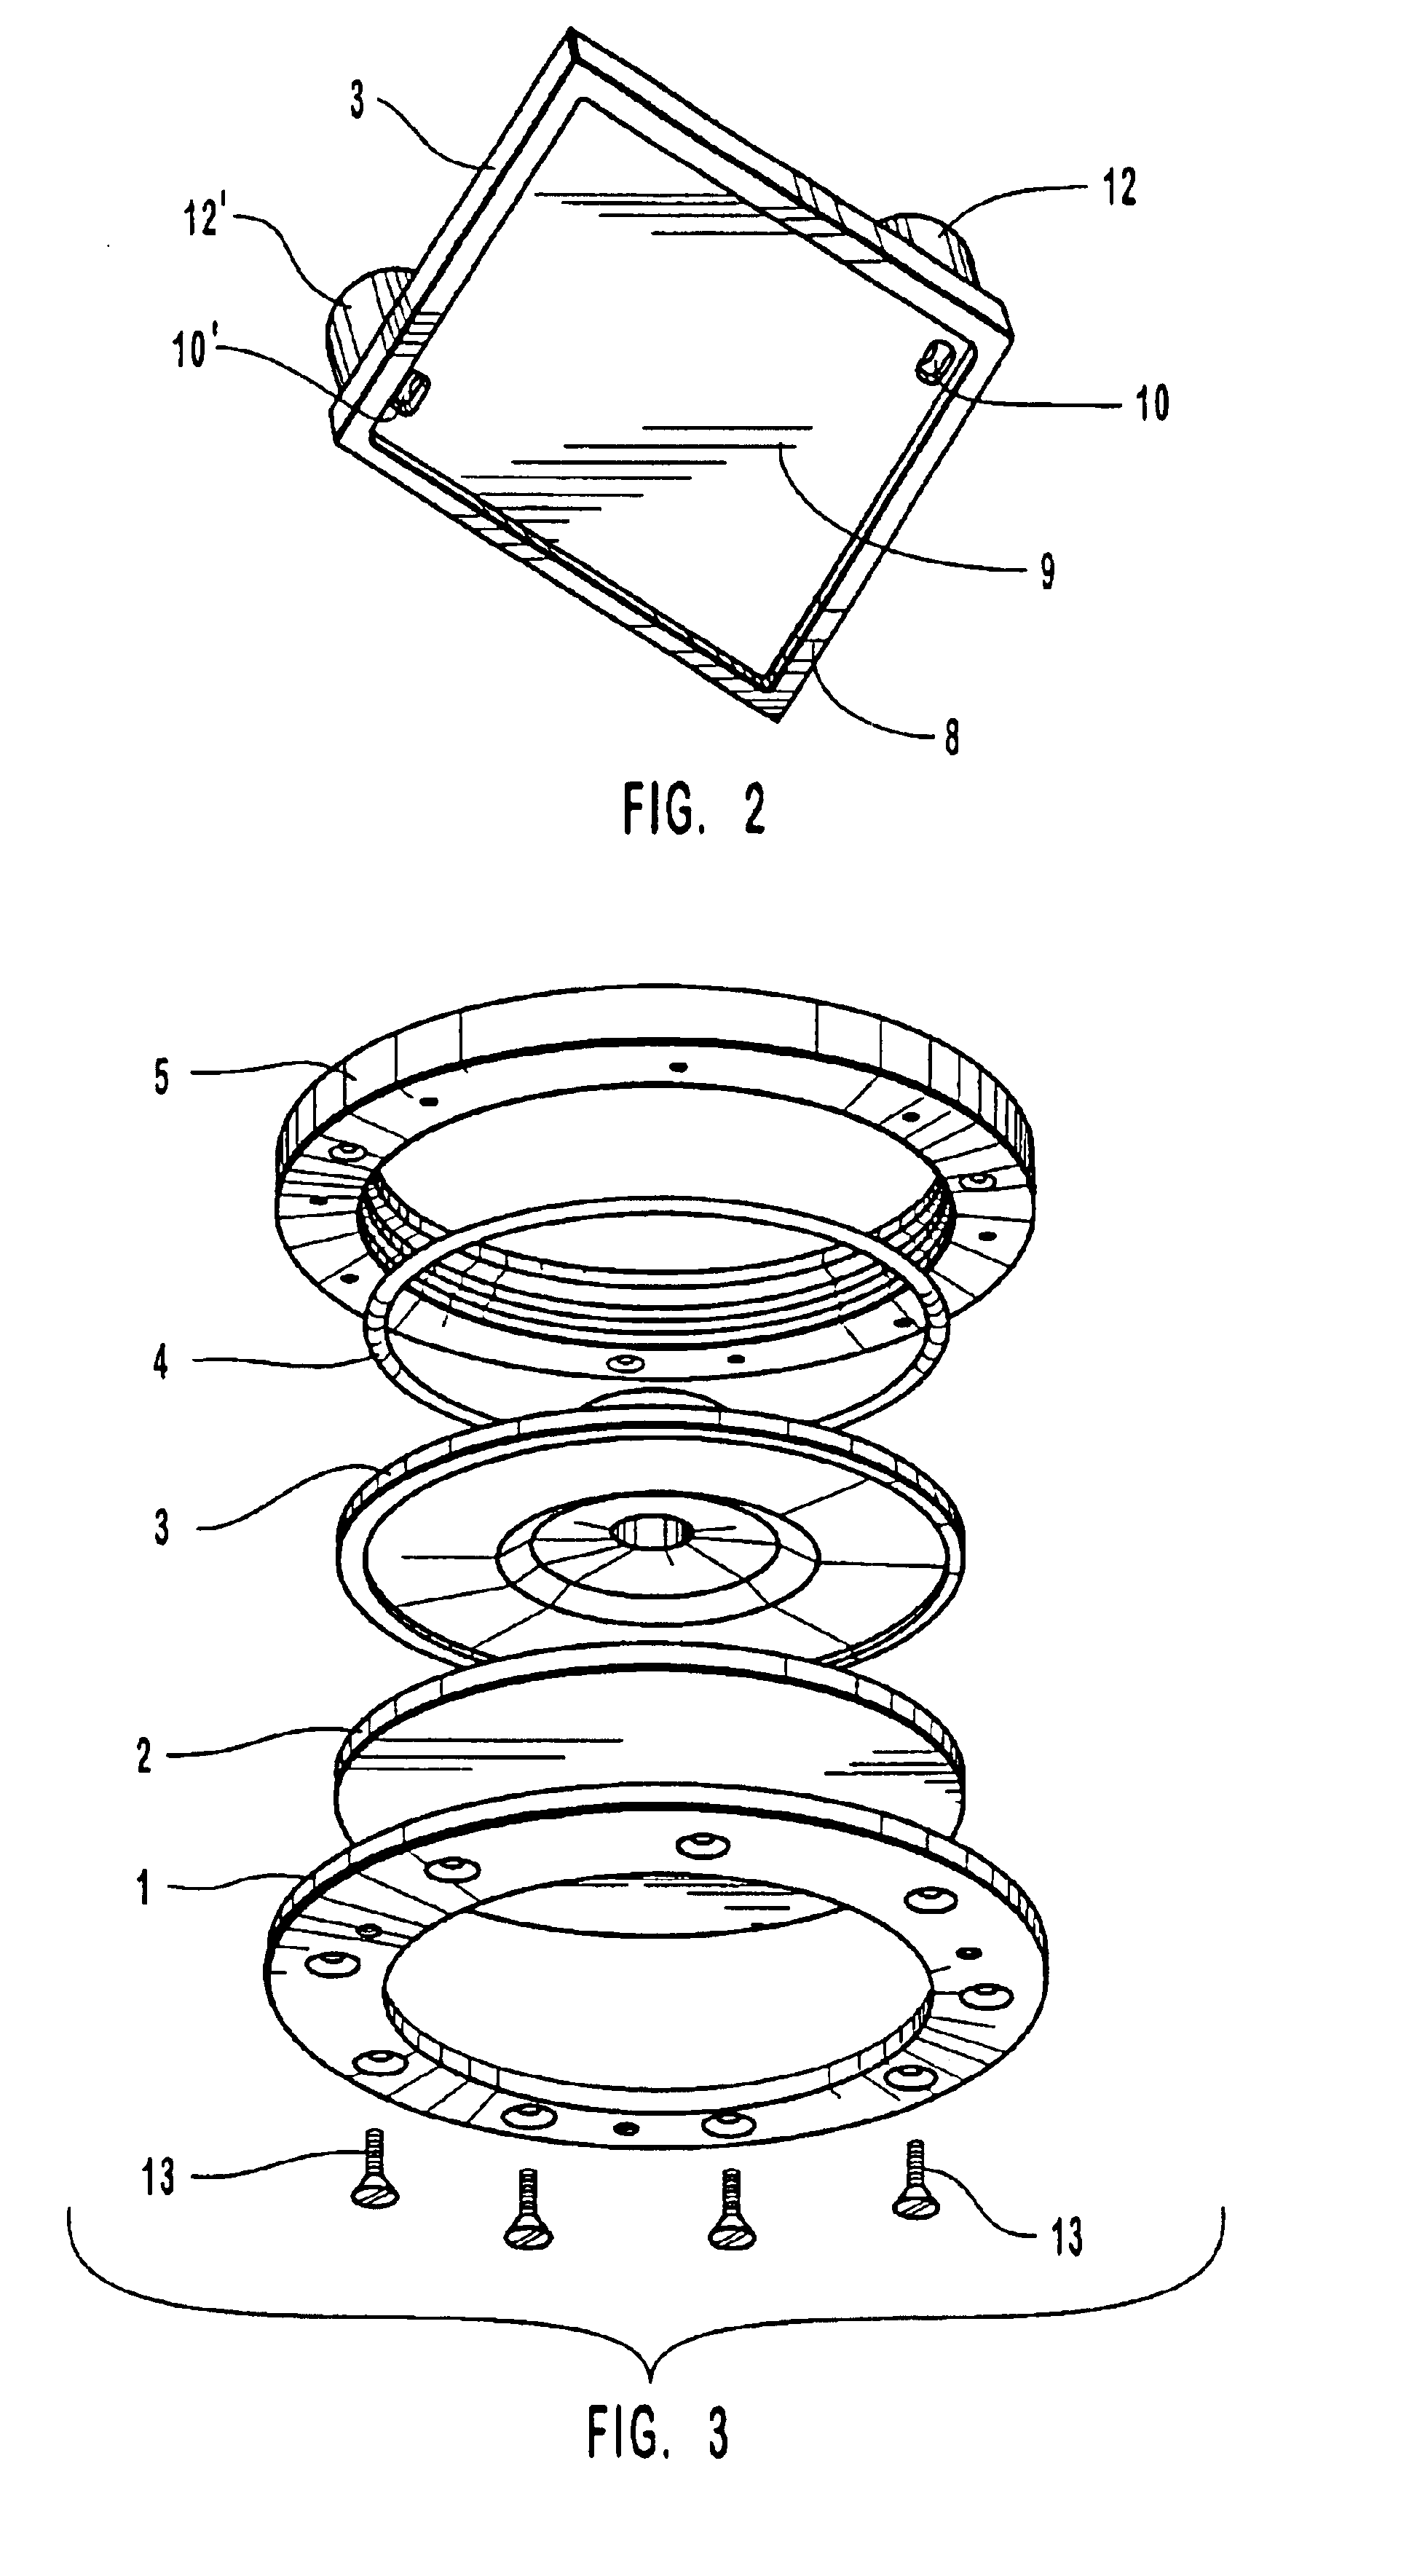 Method for conducting chemical or biochemical reactions on a solid surface within an enclosed chamber